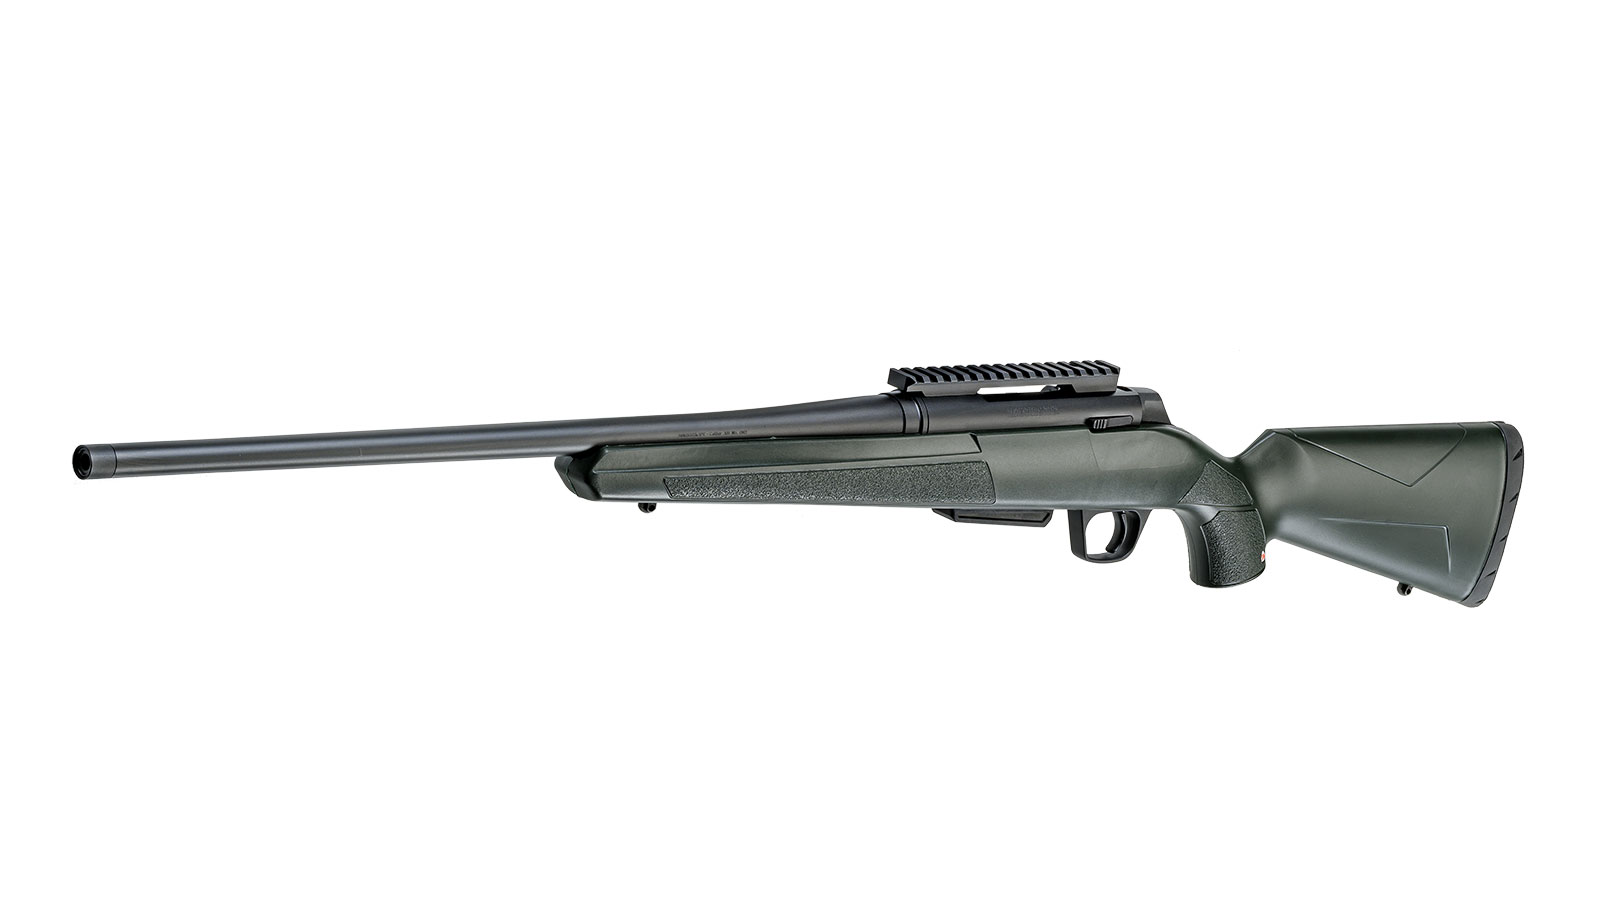 WINCHESTER XPR Stealth Threaded 6,5mm Creedmoor